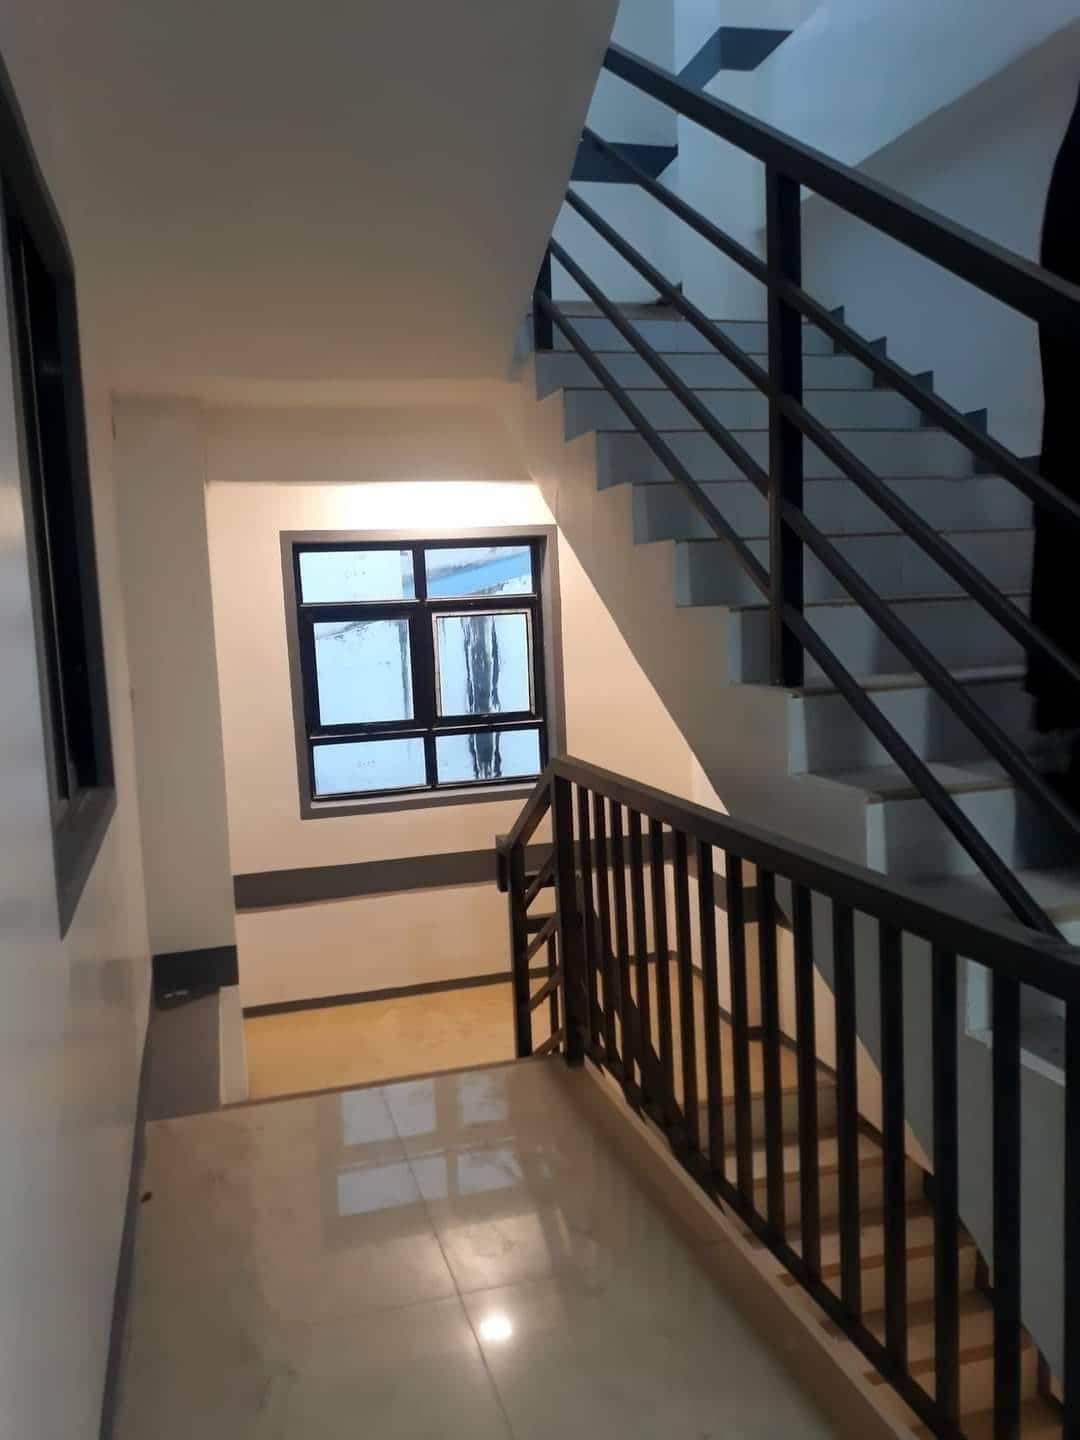 Brand New FLAT in Pagadian City - 2BR